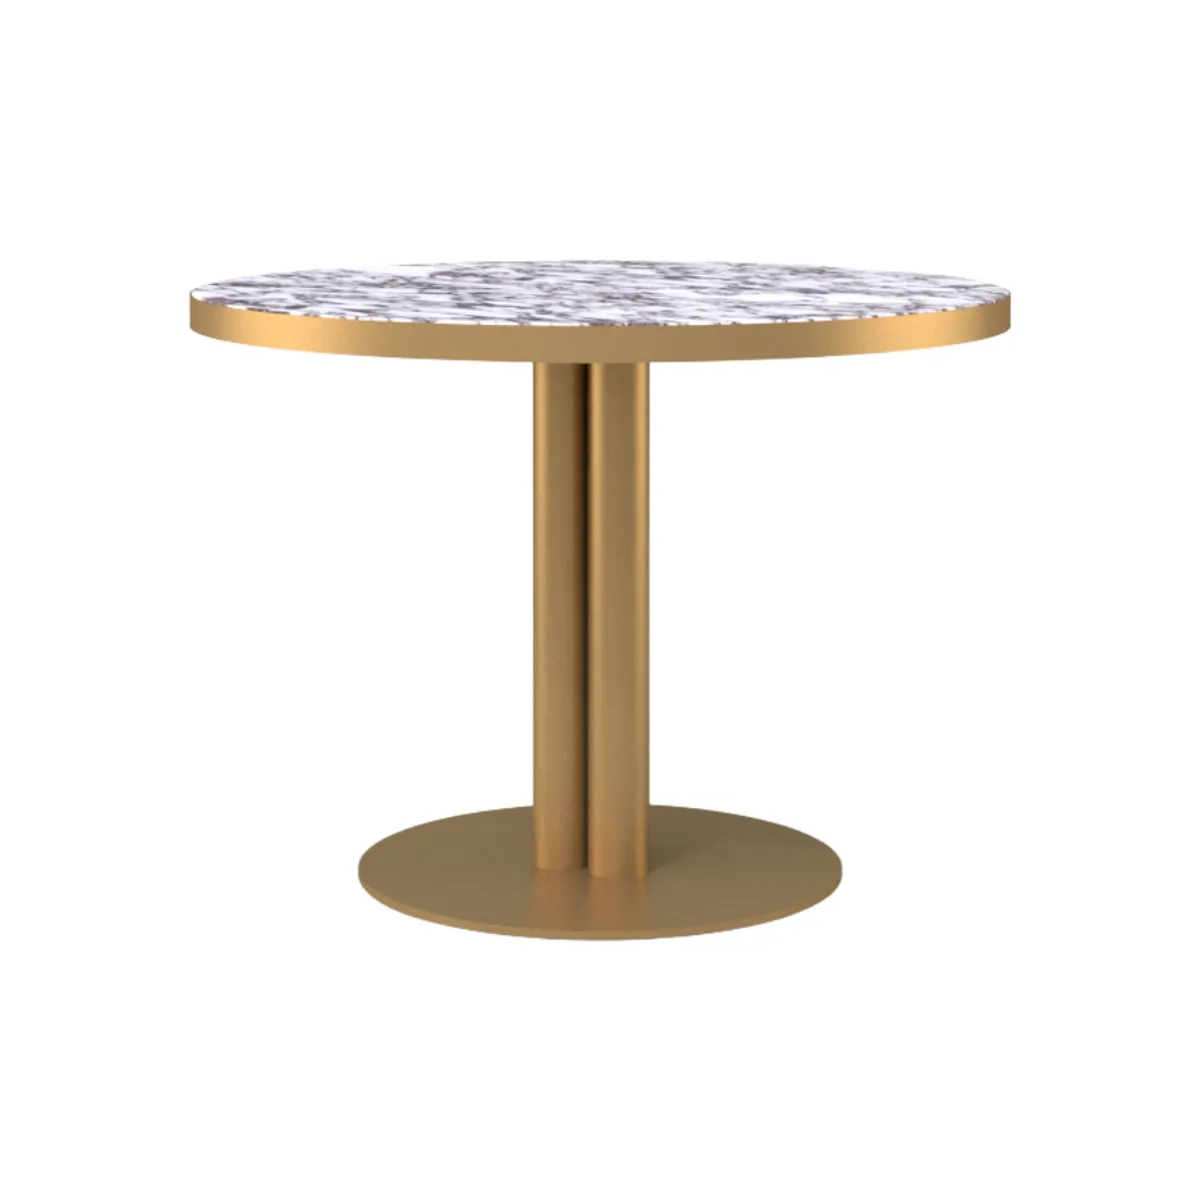 Gouqi oval dining table 1